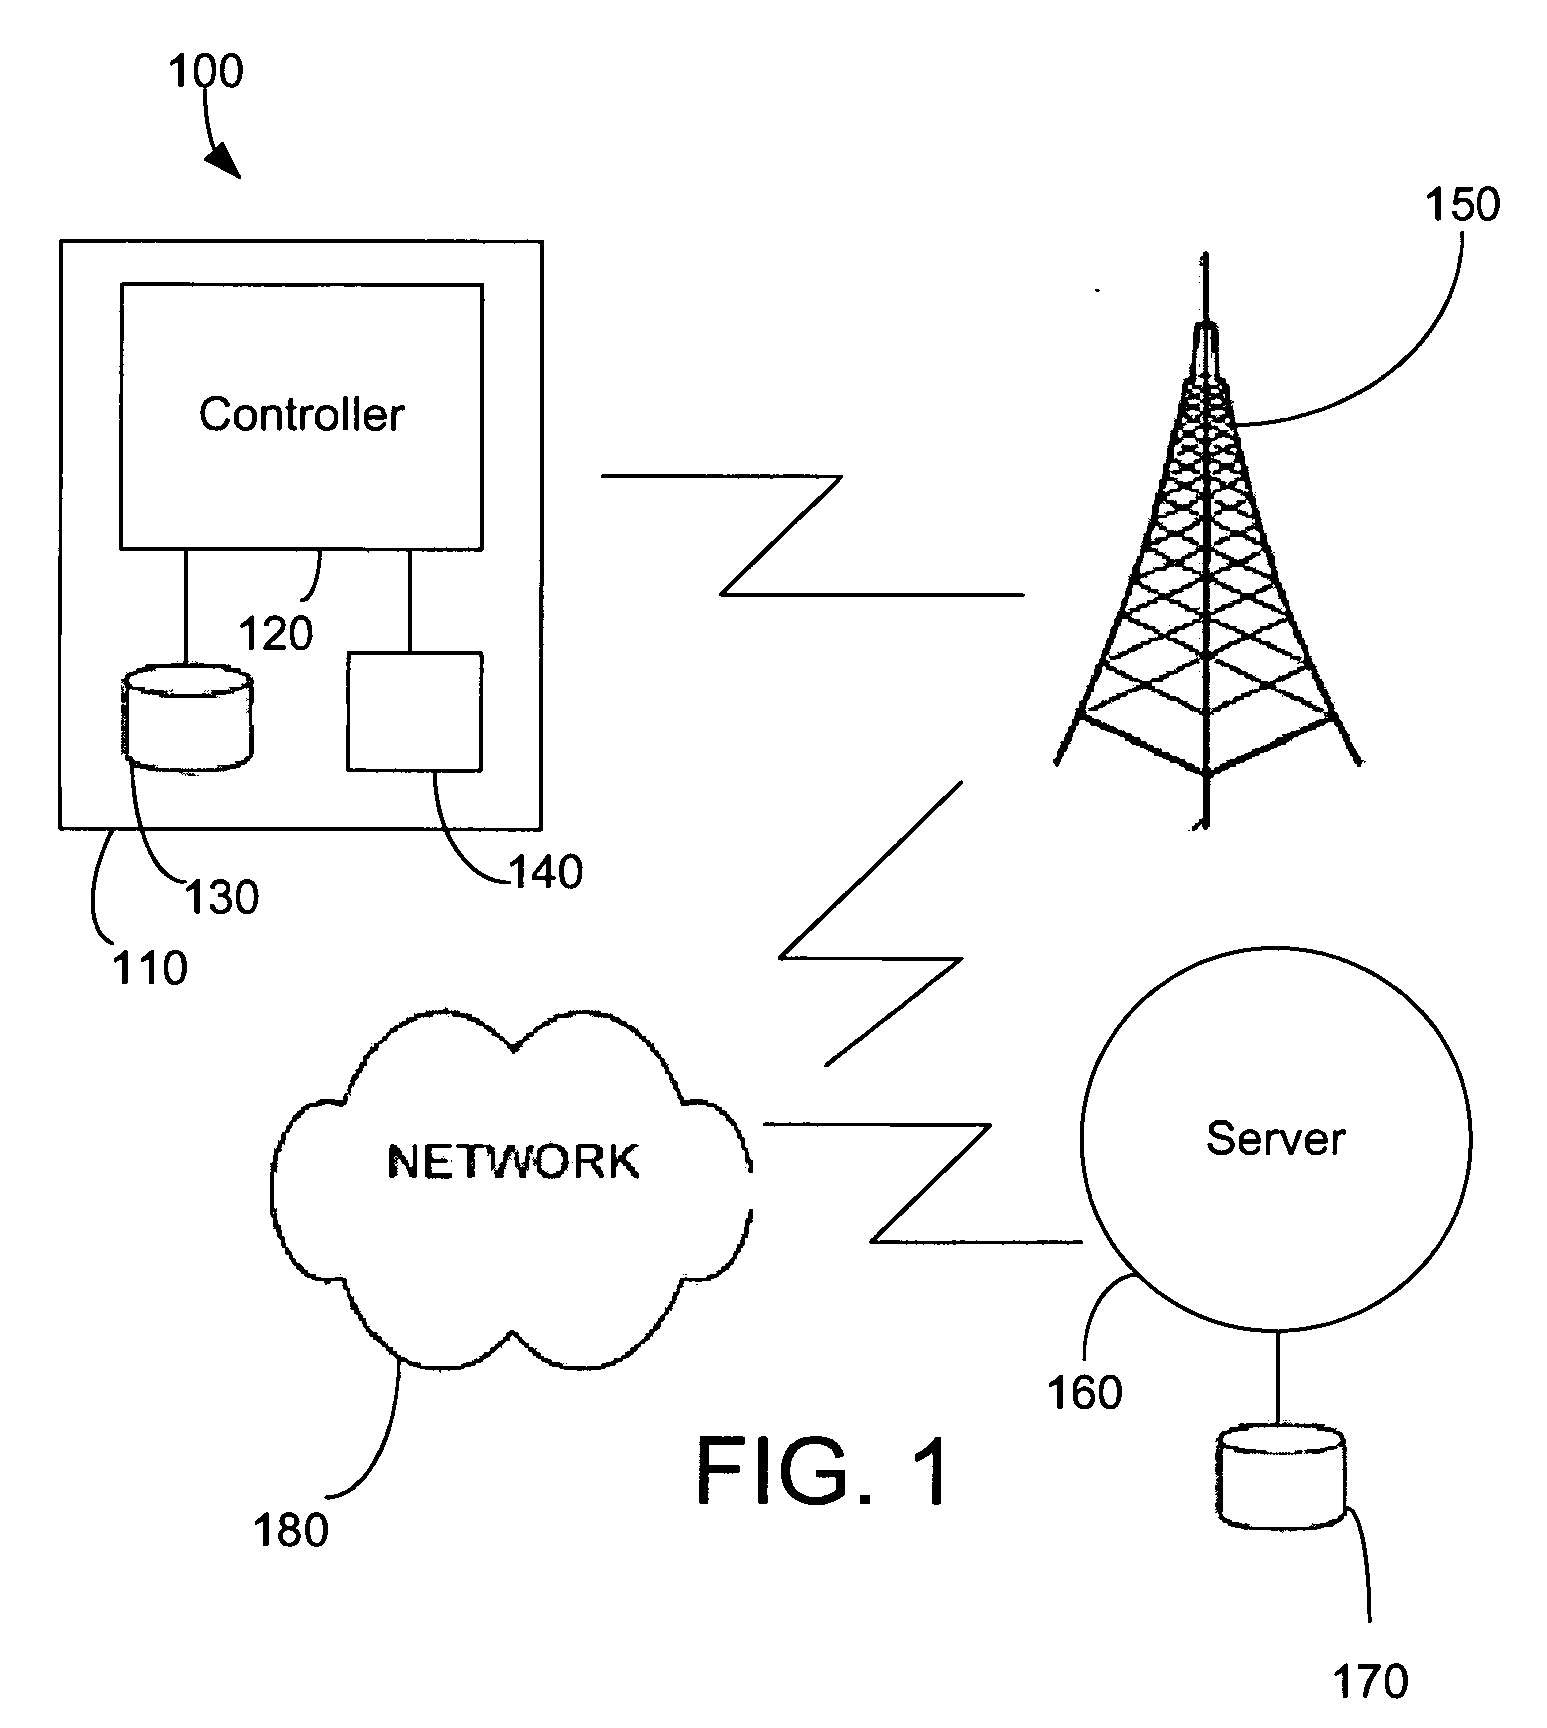 System and Method for Remotely Updating Control Software in a Vehicle With an Electric Drive System